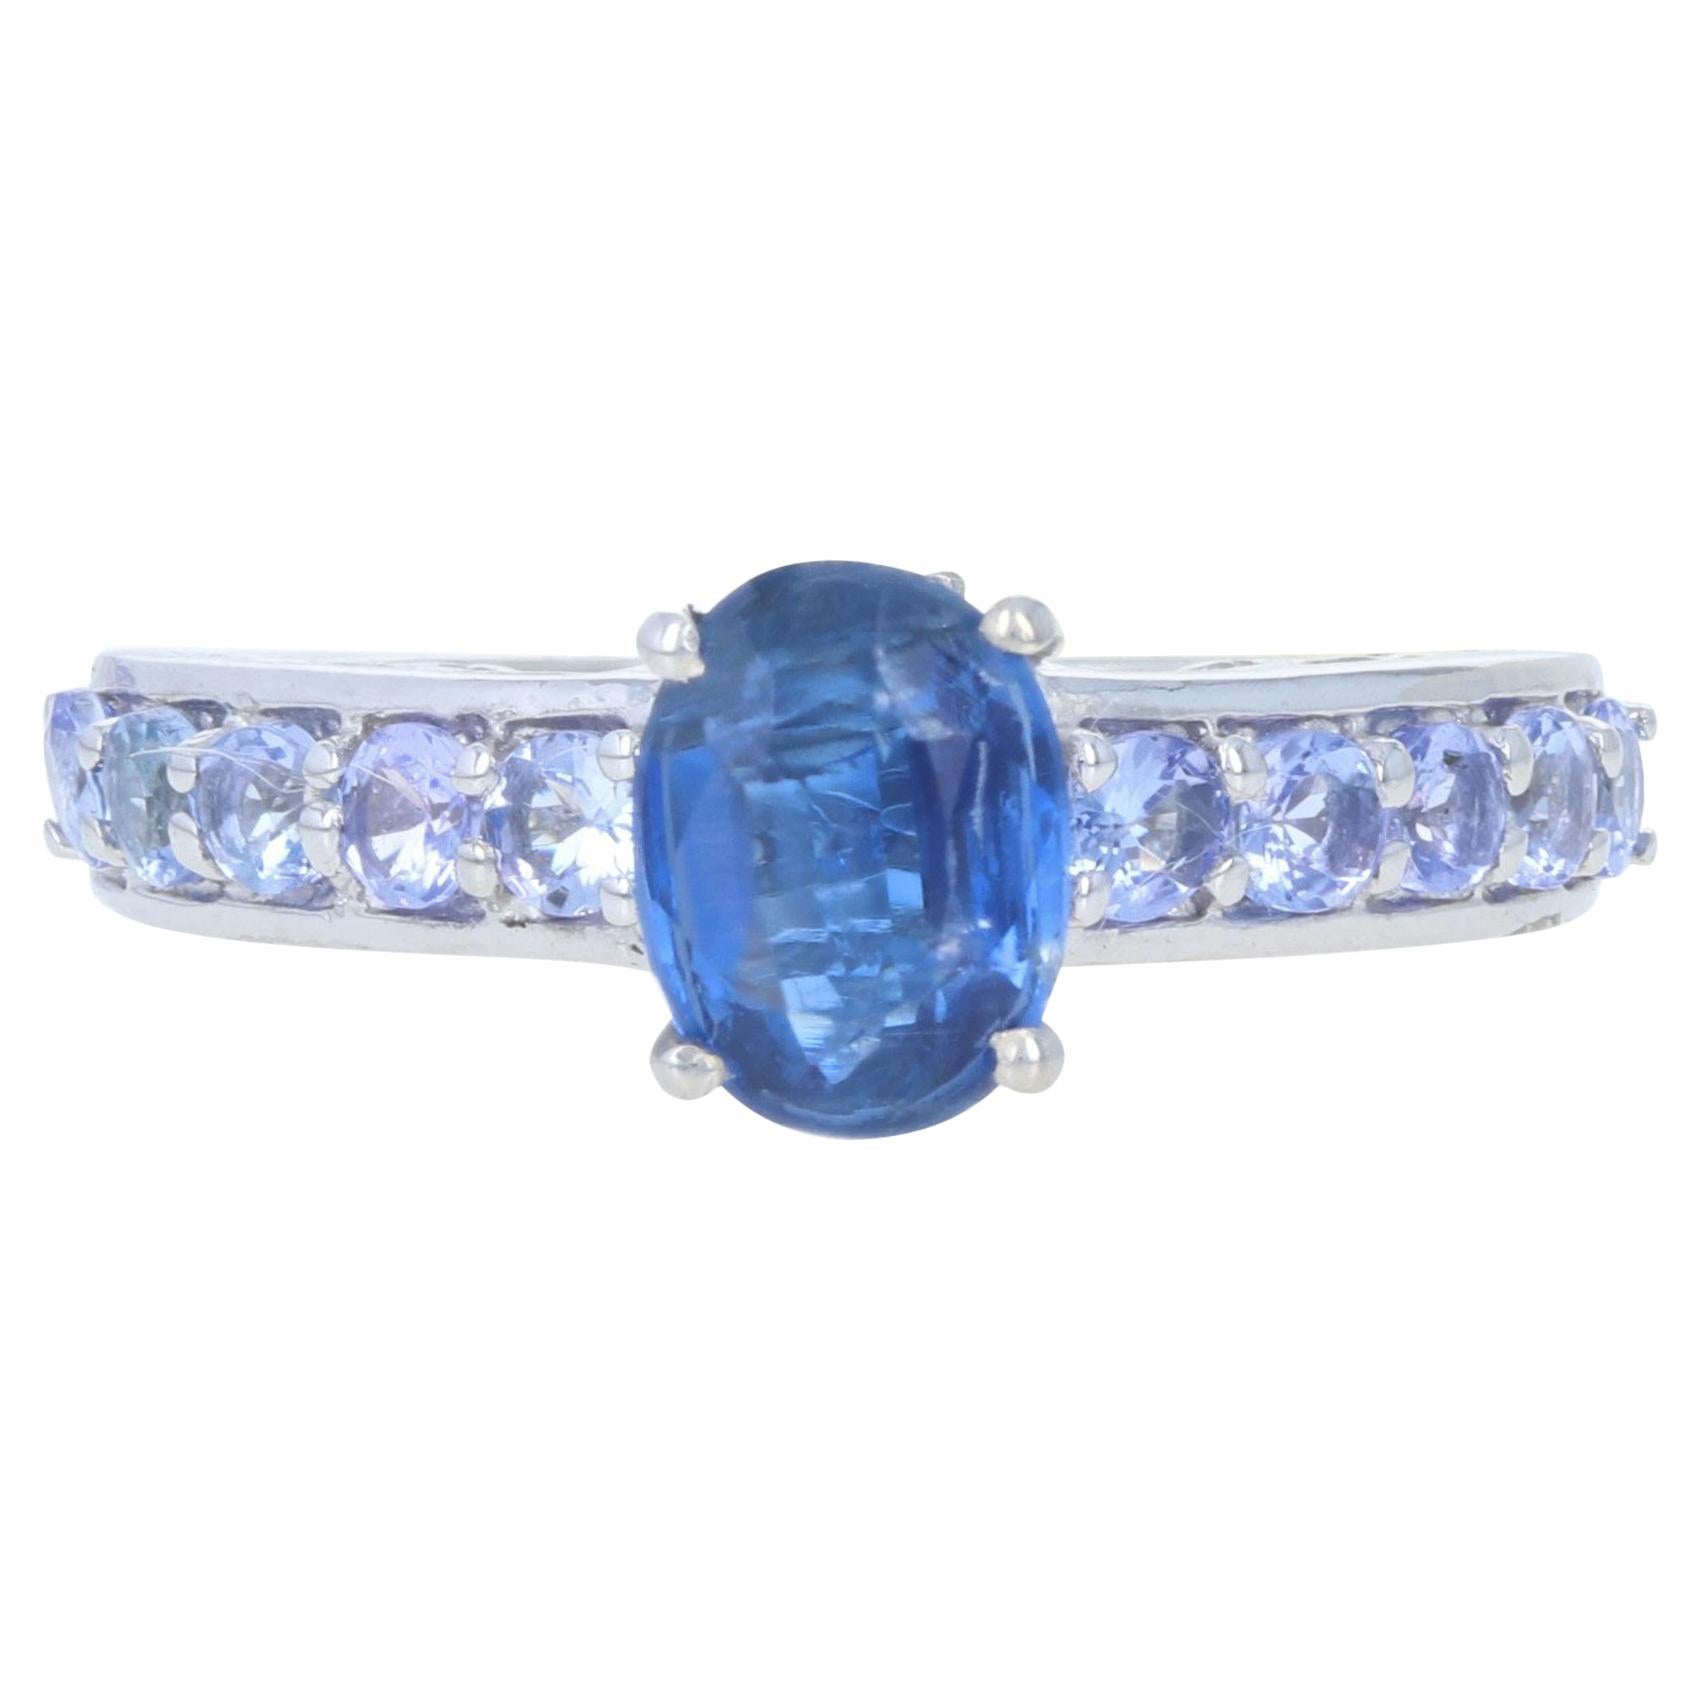 NEW Tanzanite Bypass Ring 925 Sterling Silver Women's Fine Estate Size 8 